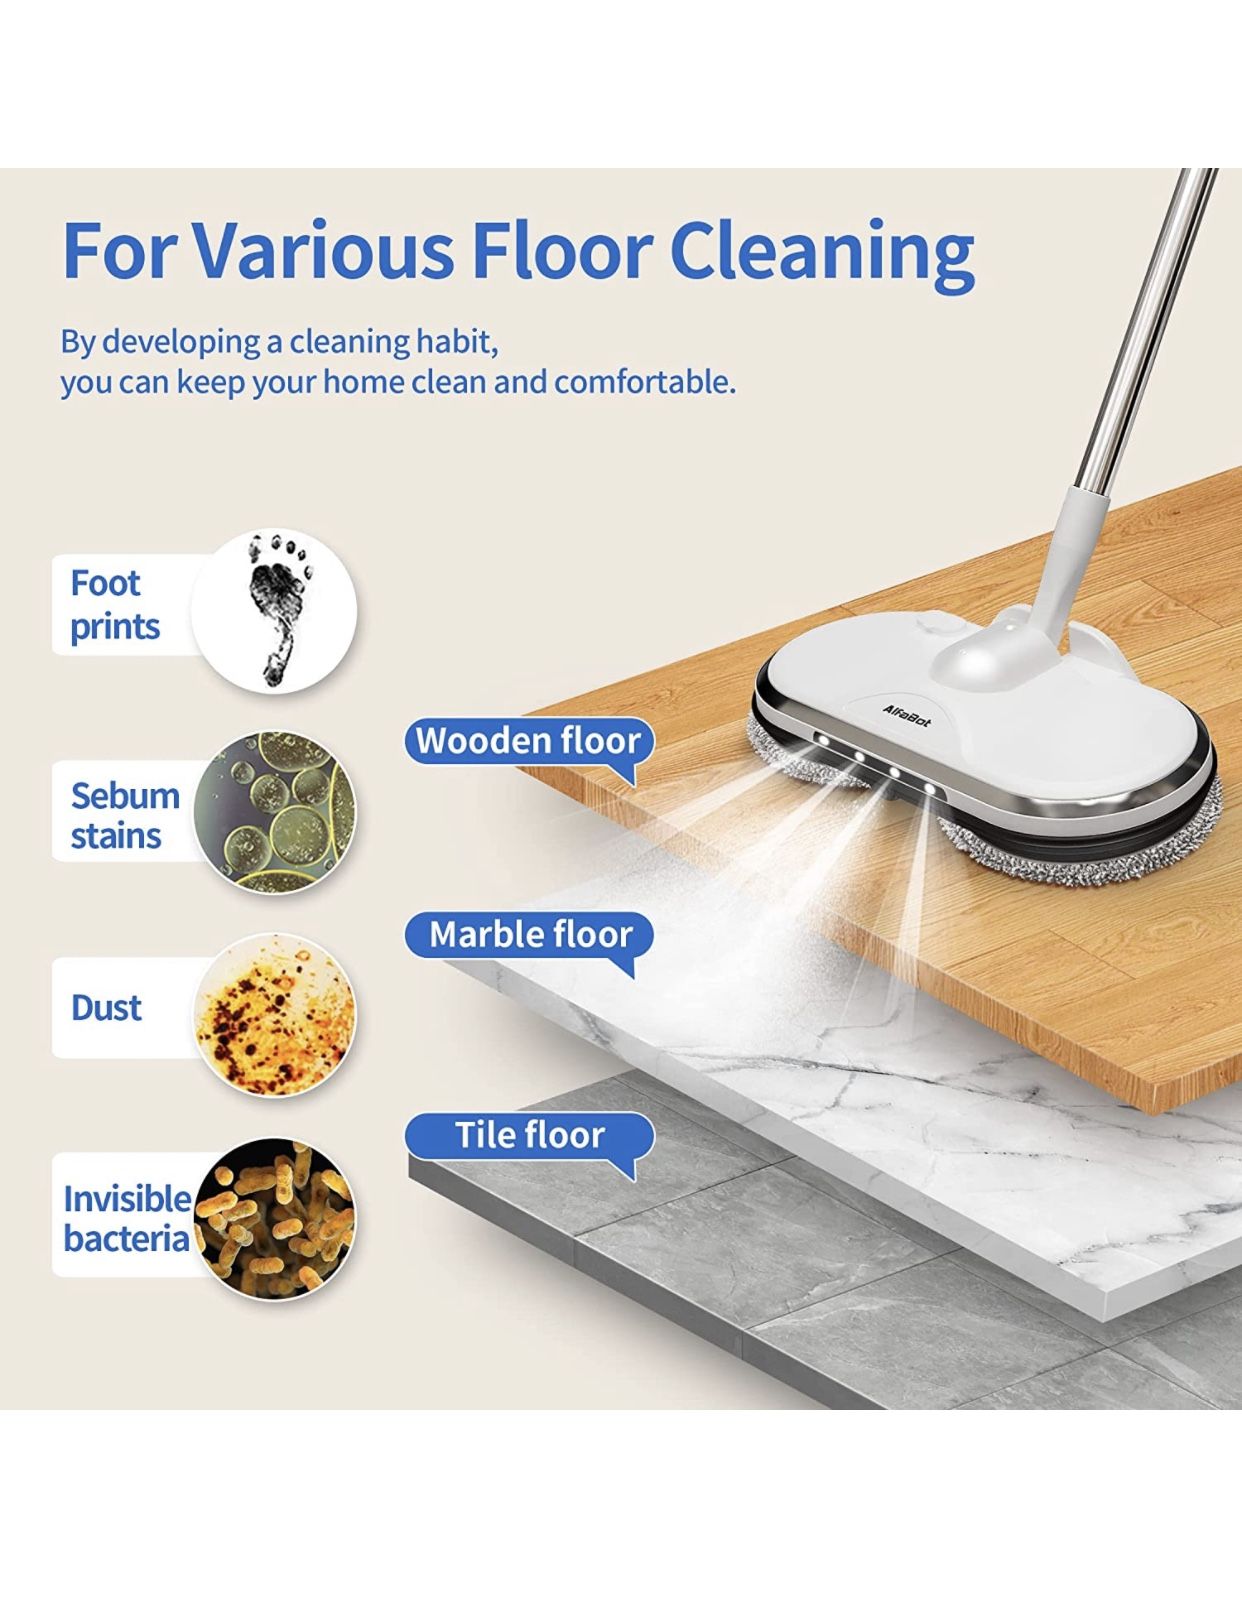 Cordless Electric Mops For Floor Cleaning, AlfaBot WS-24 Electric Spin Mop, Electric Mop with Water Sprayer and LED Headlight, Floor Scrubber for Hard